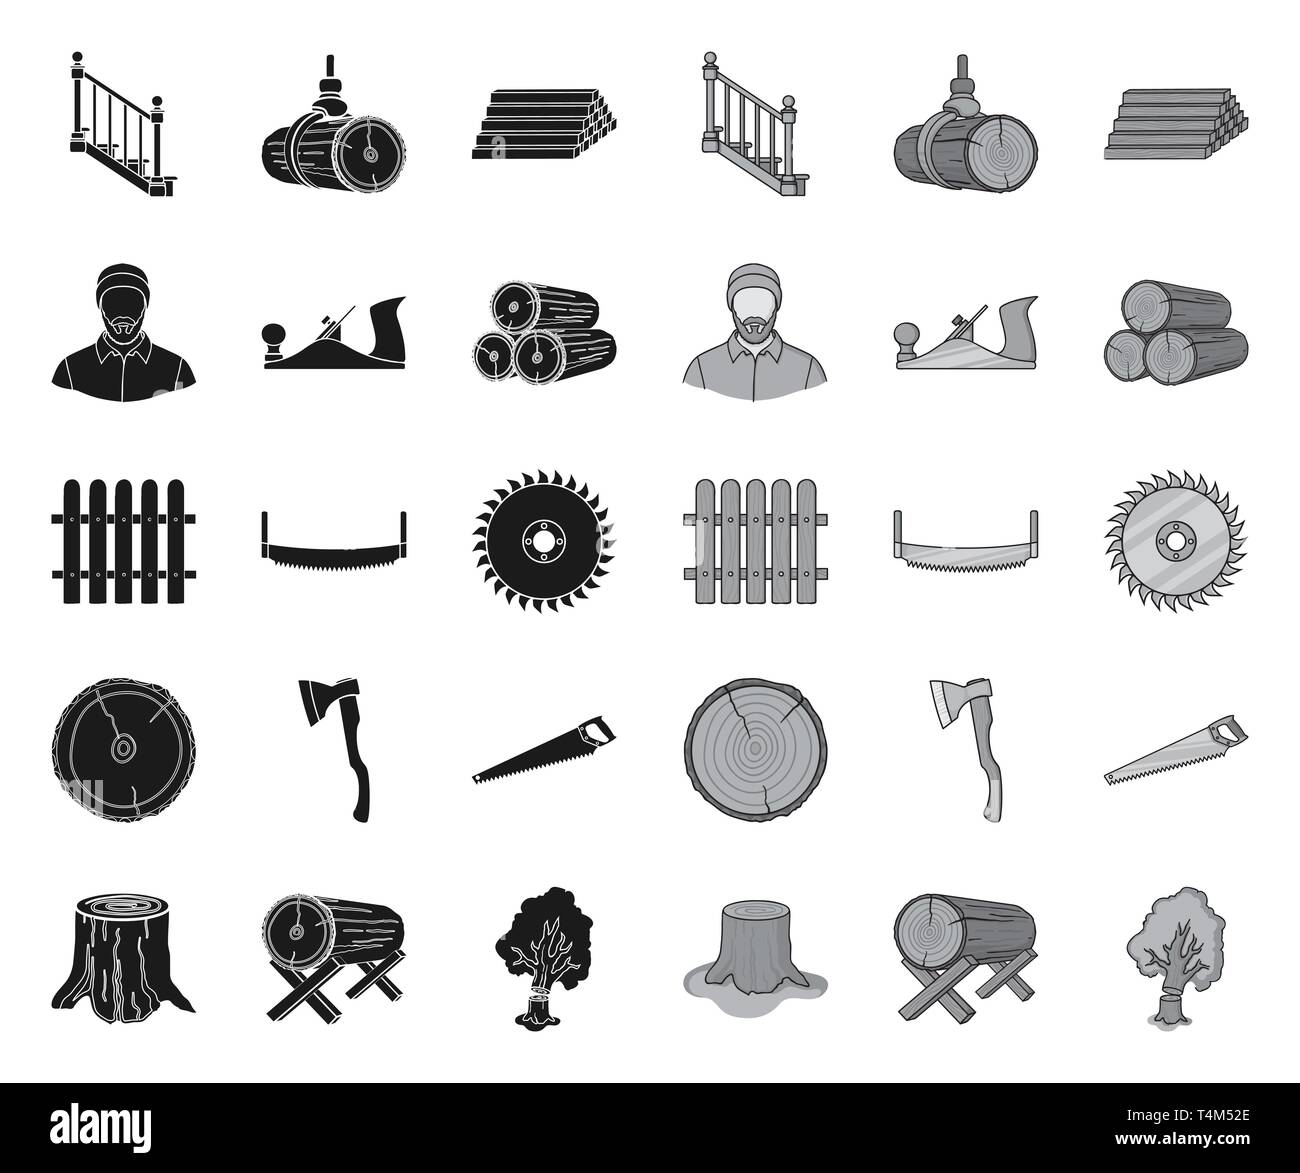 art,axe,black.mono,chisel,collection,crane,cross,design,disc,equipment,falling,fence,goats,hand,hydraulic,icon,illustration,isolated,jack,logo,logs,lumber,lumbers,lumbrejack,plane,processing,product,production,saw,sawing,sawmill,section,set,sign,stack,stairs,stump,symbol,timber,tools,tree,two-man,vector,web Vector Vectors , Stock Vector